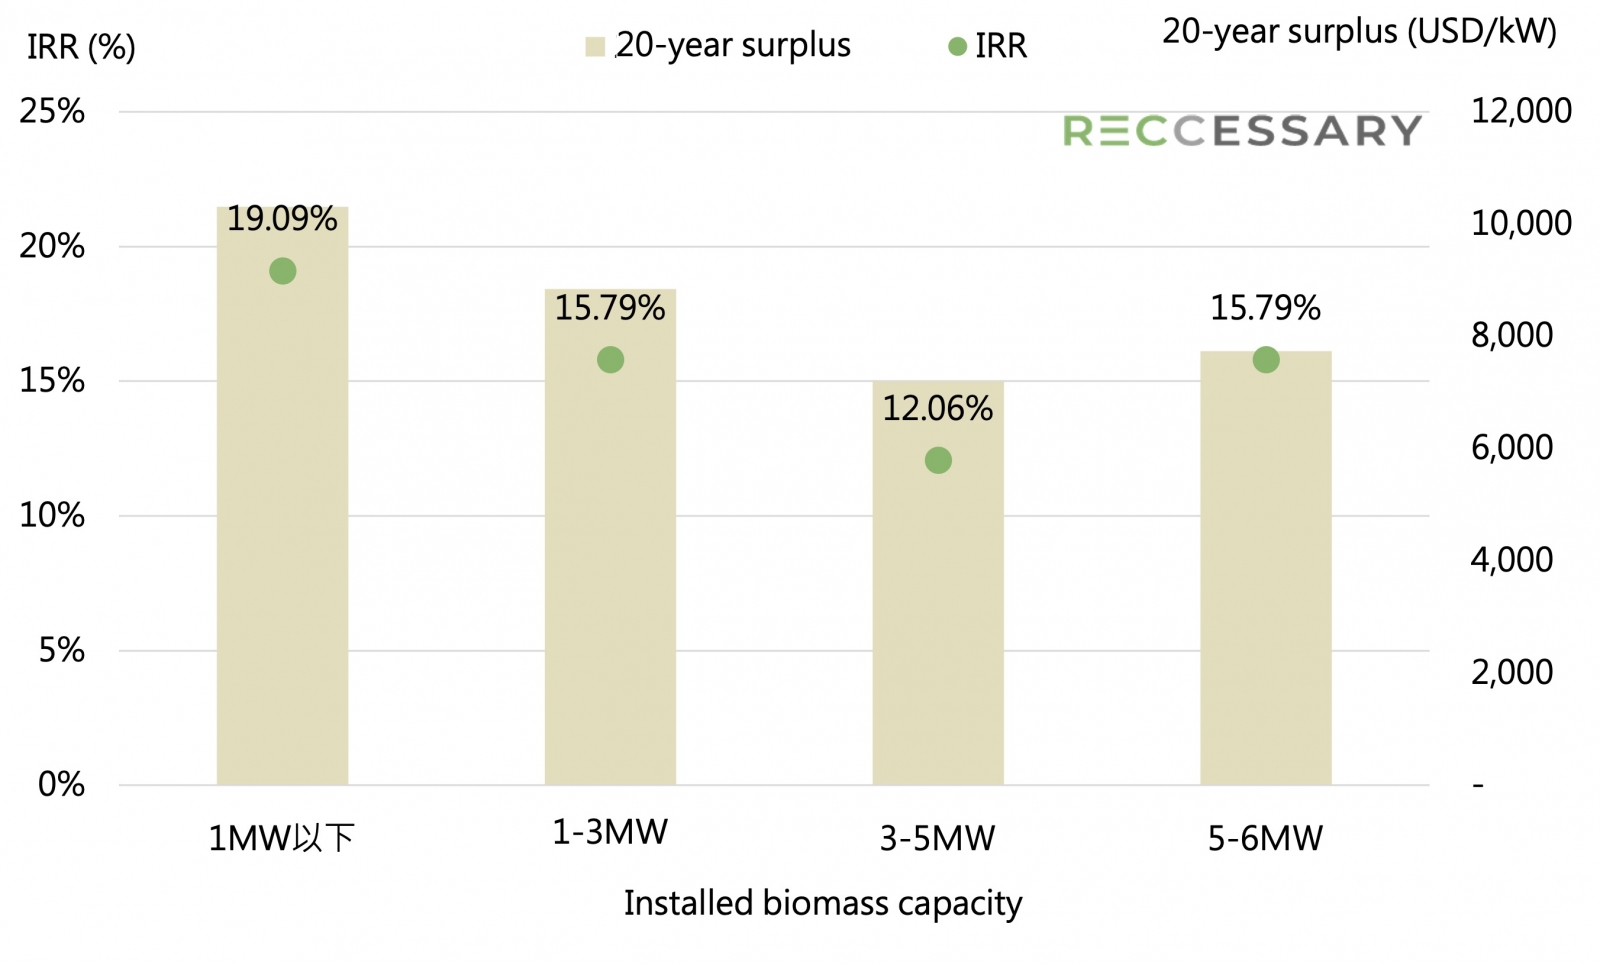 IRR and 20-year surplus per kW for biomass installation in Thailand in 2021 by capacity